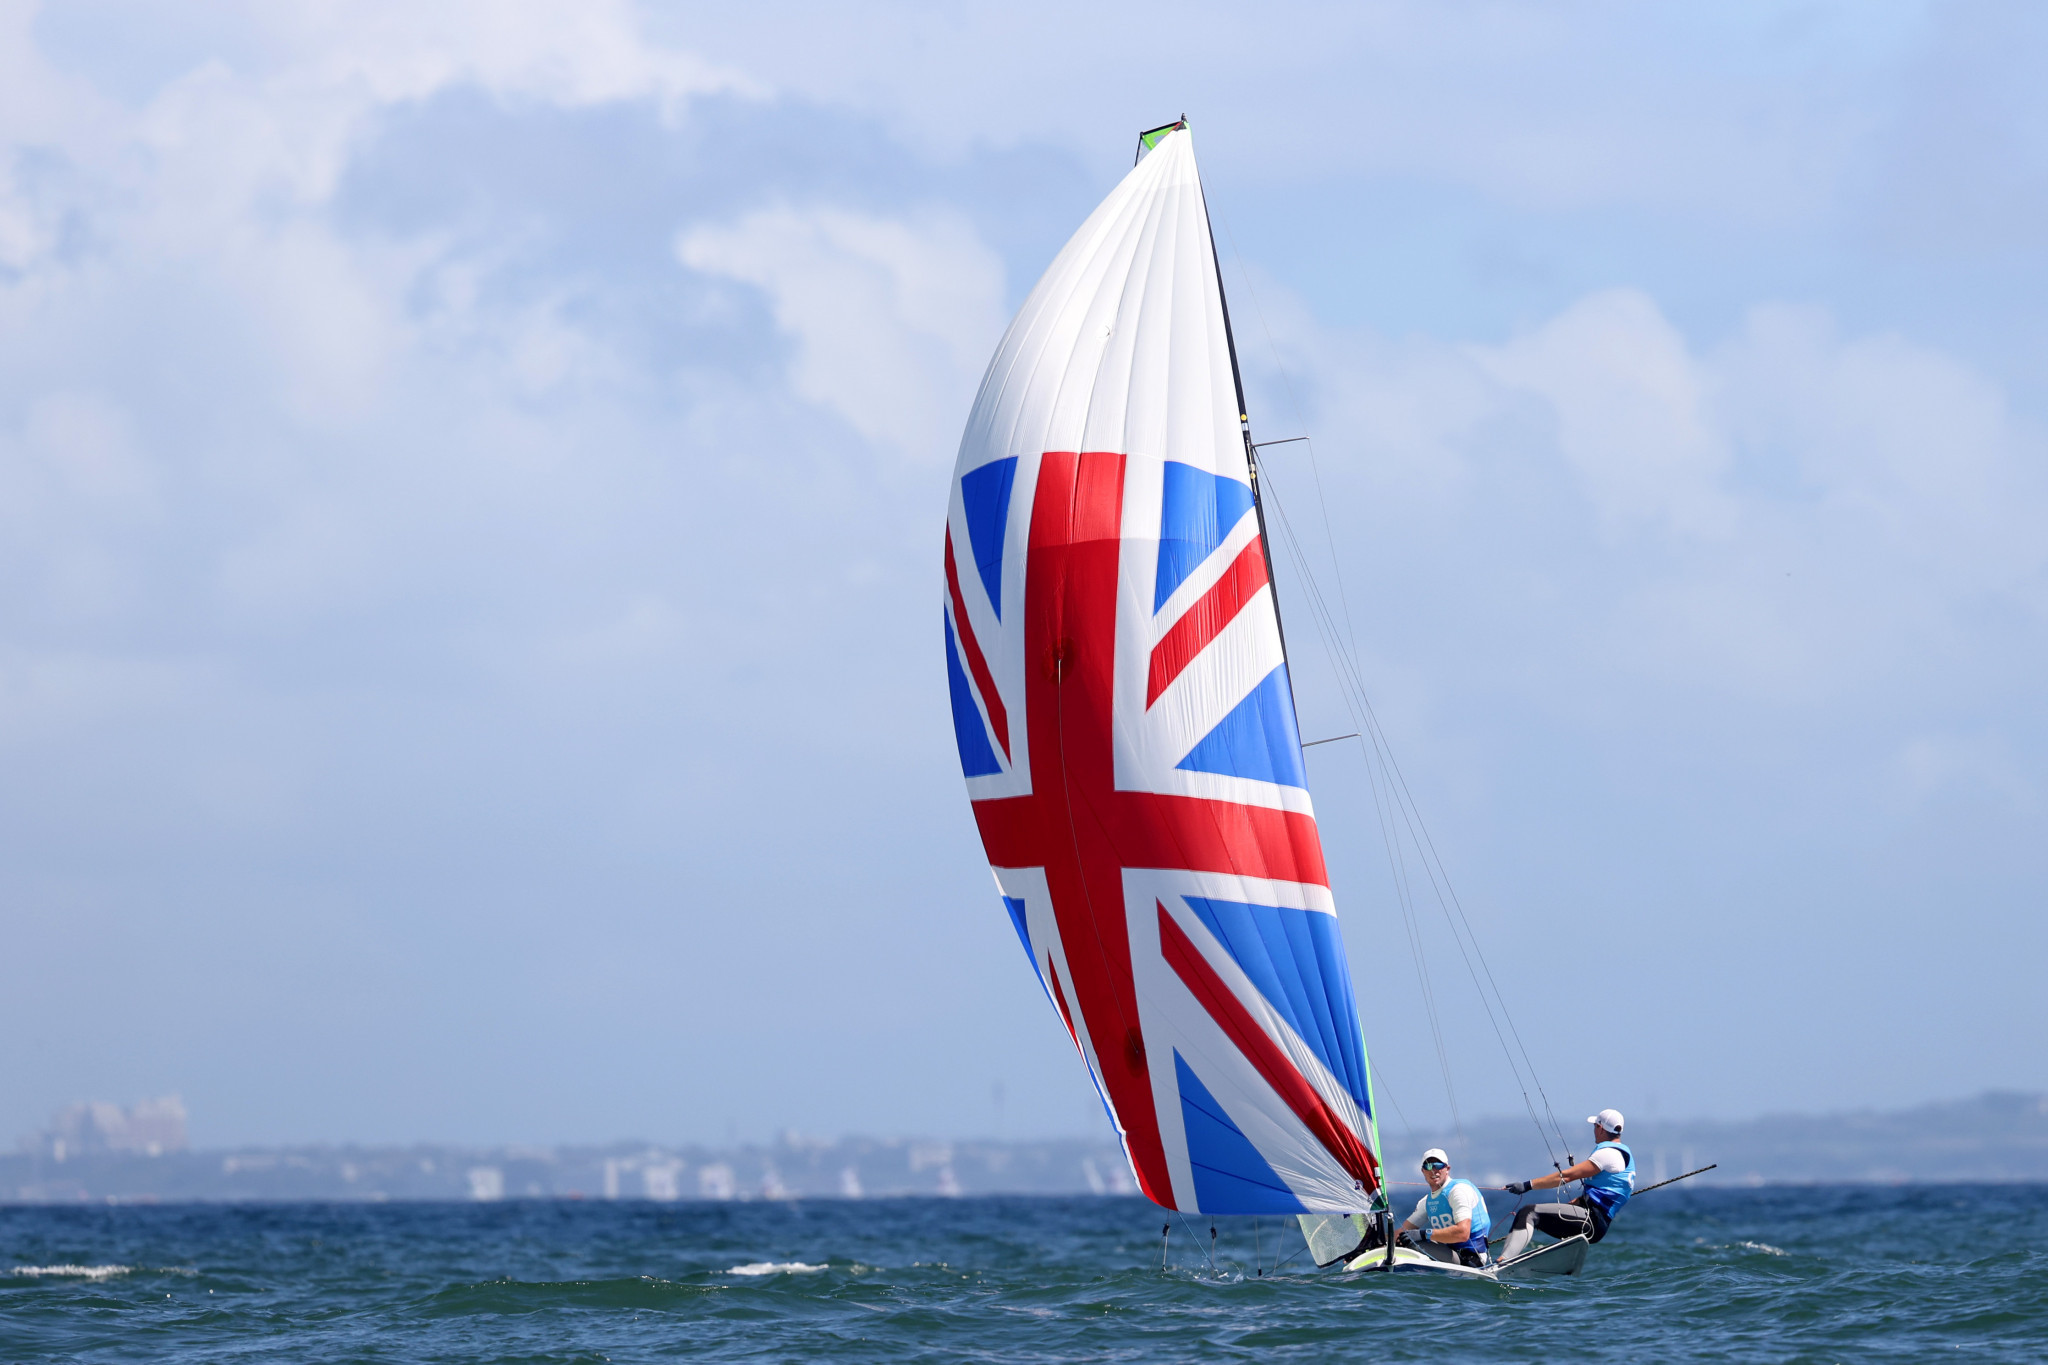 Stuart Bithell won gold in the men's 49er event at Tokyo 2020 with Dylan Fletcher ©Getty Images